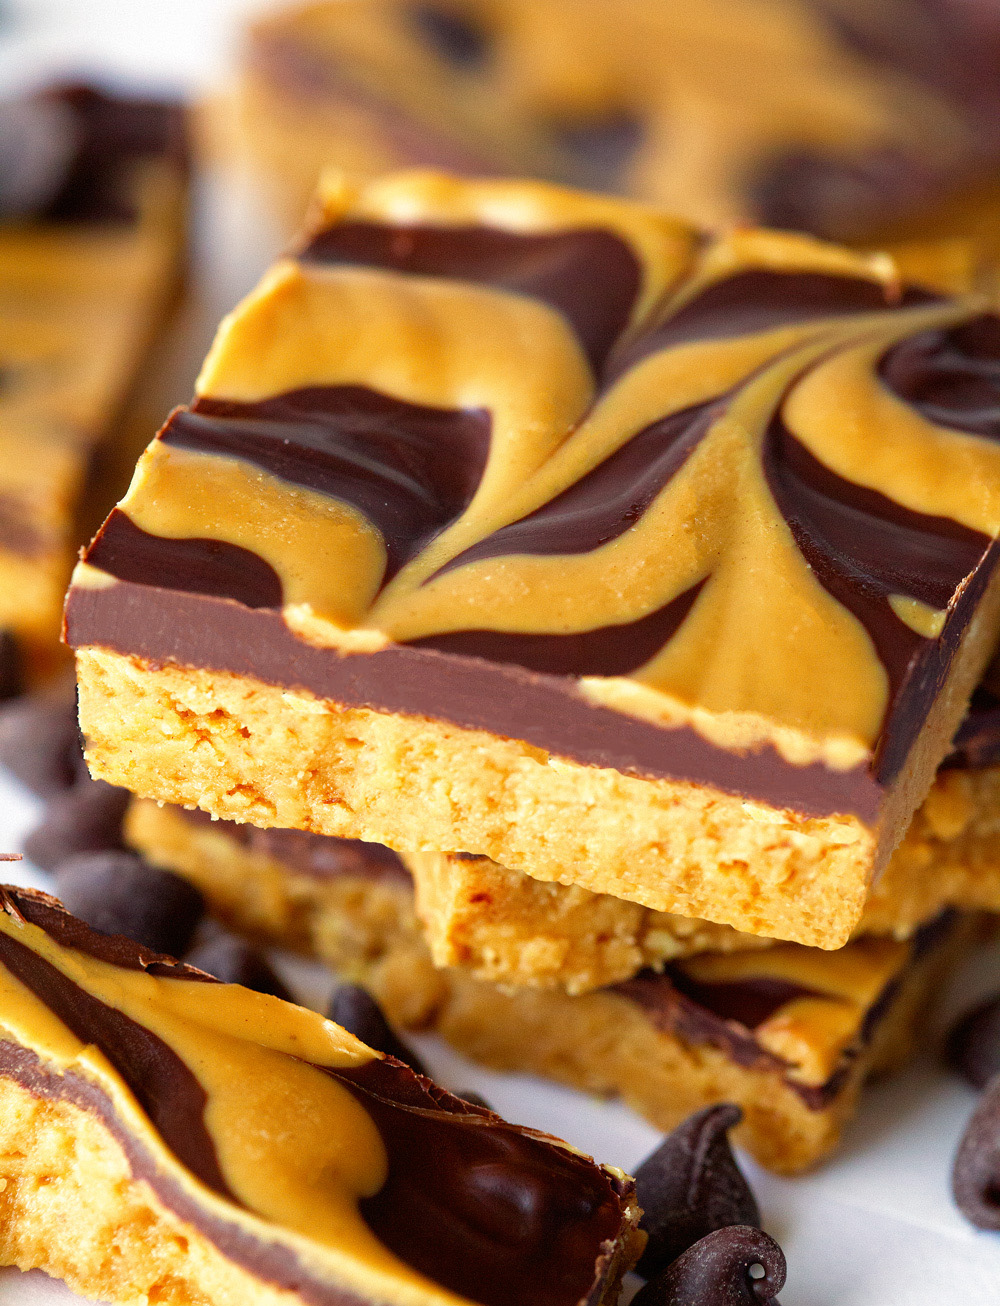 Snack bars while on the go? Peanut Butter Bars is the answer.